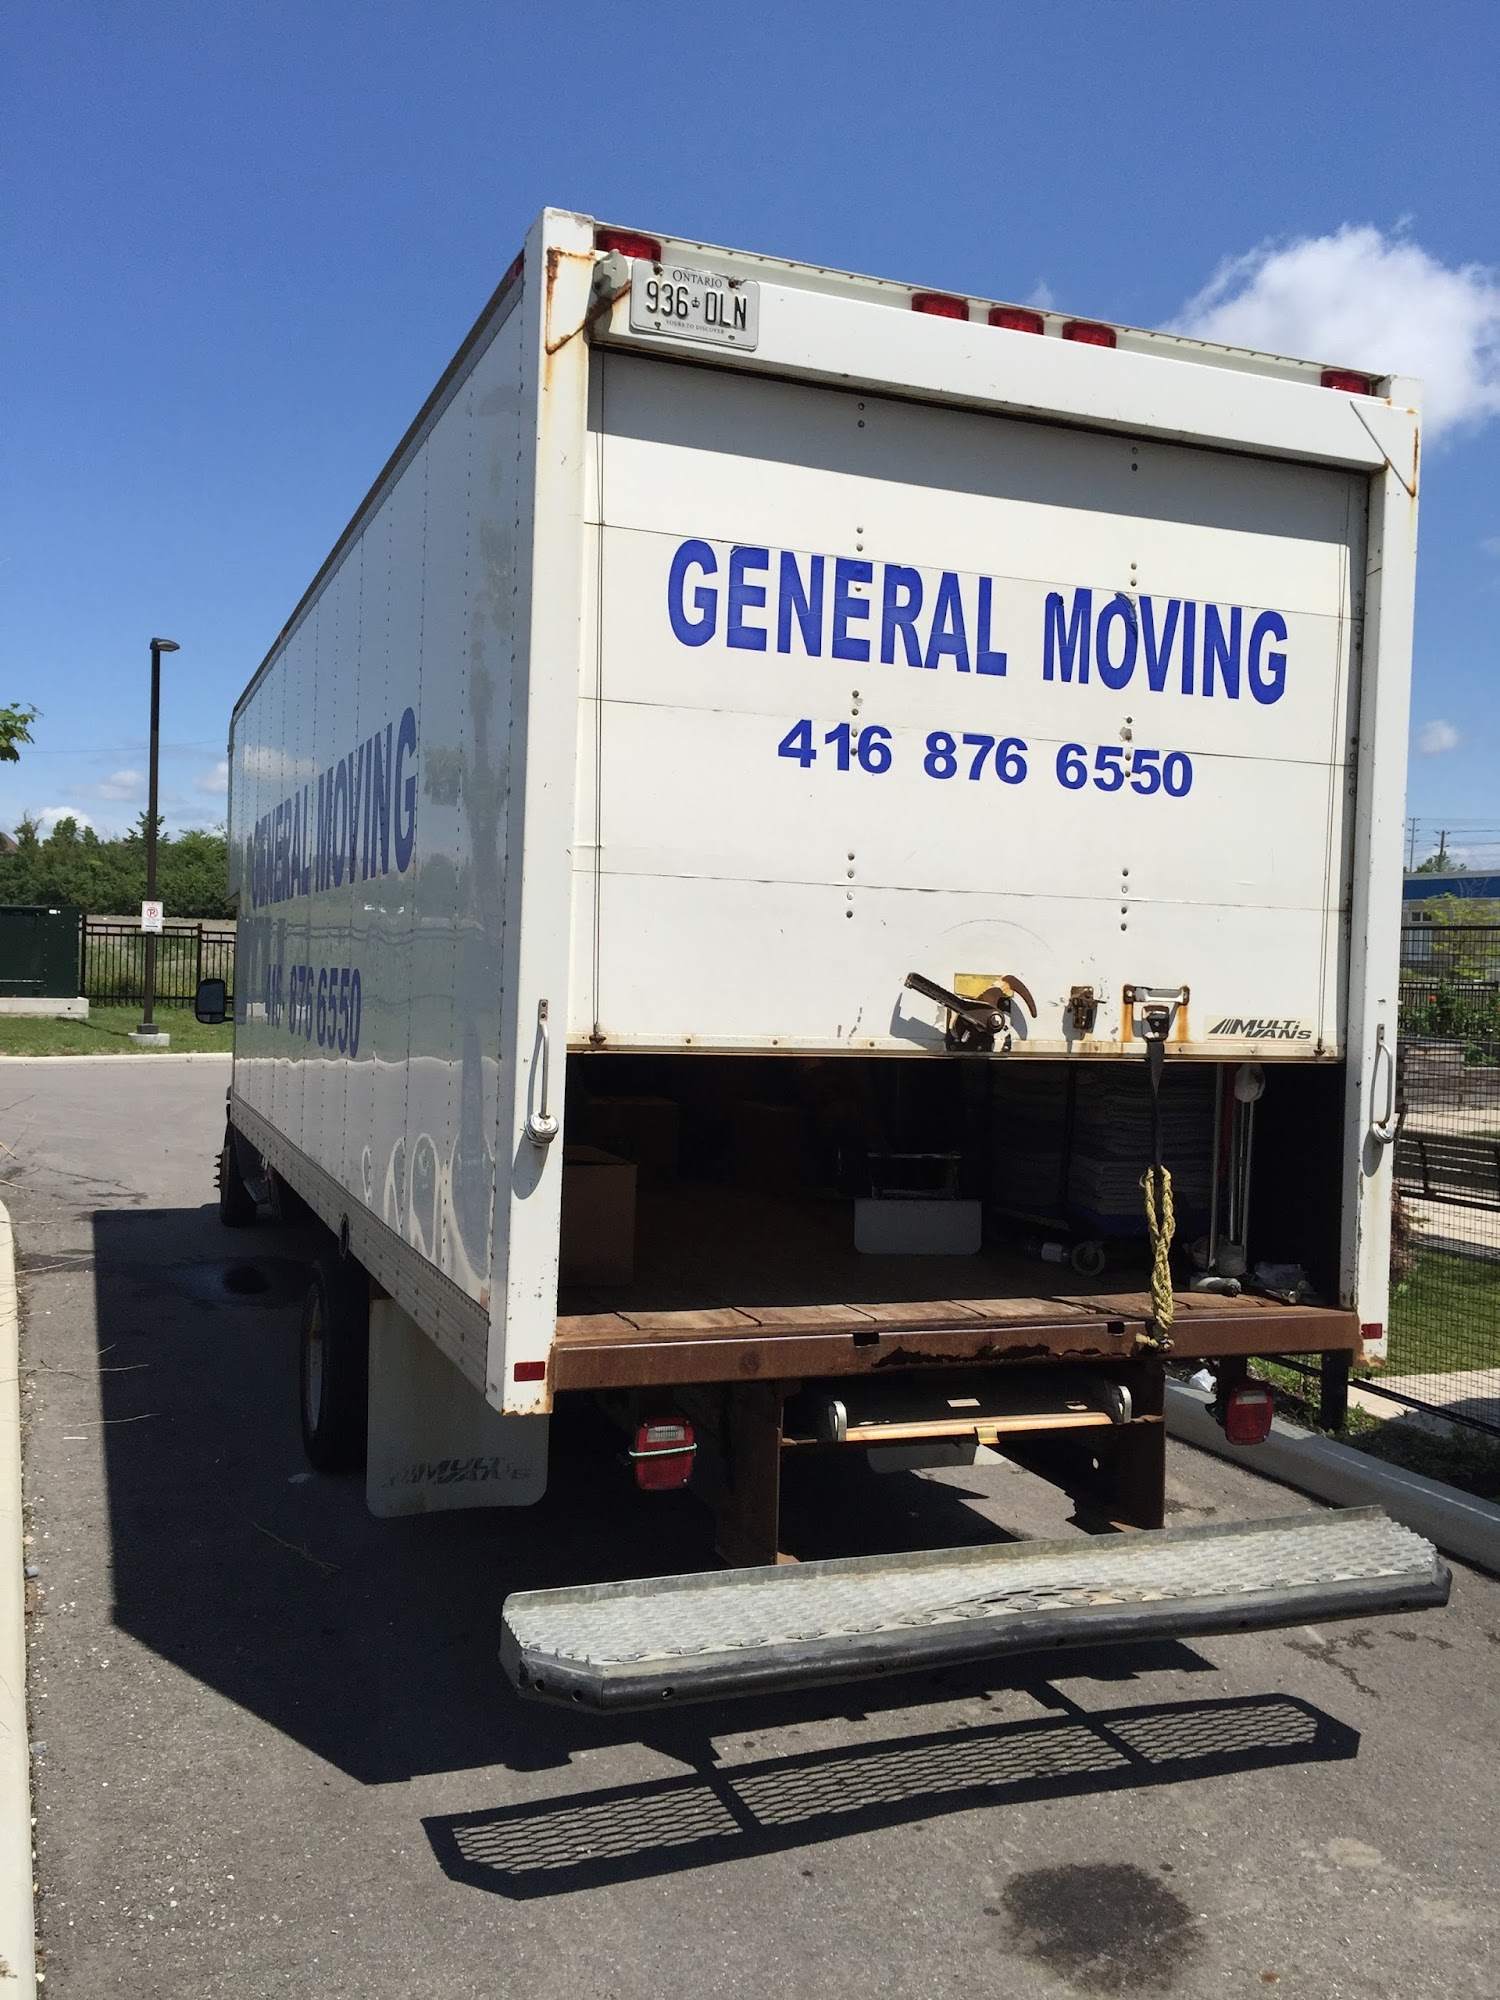 General Moving